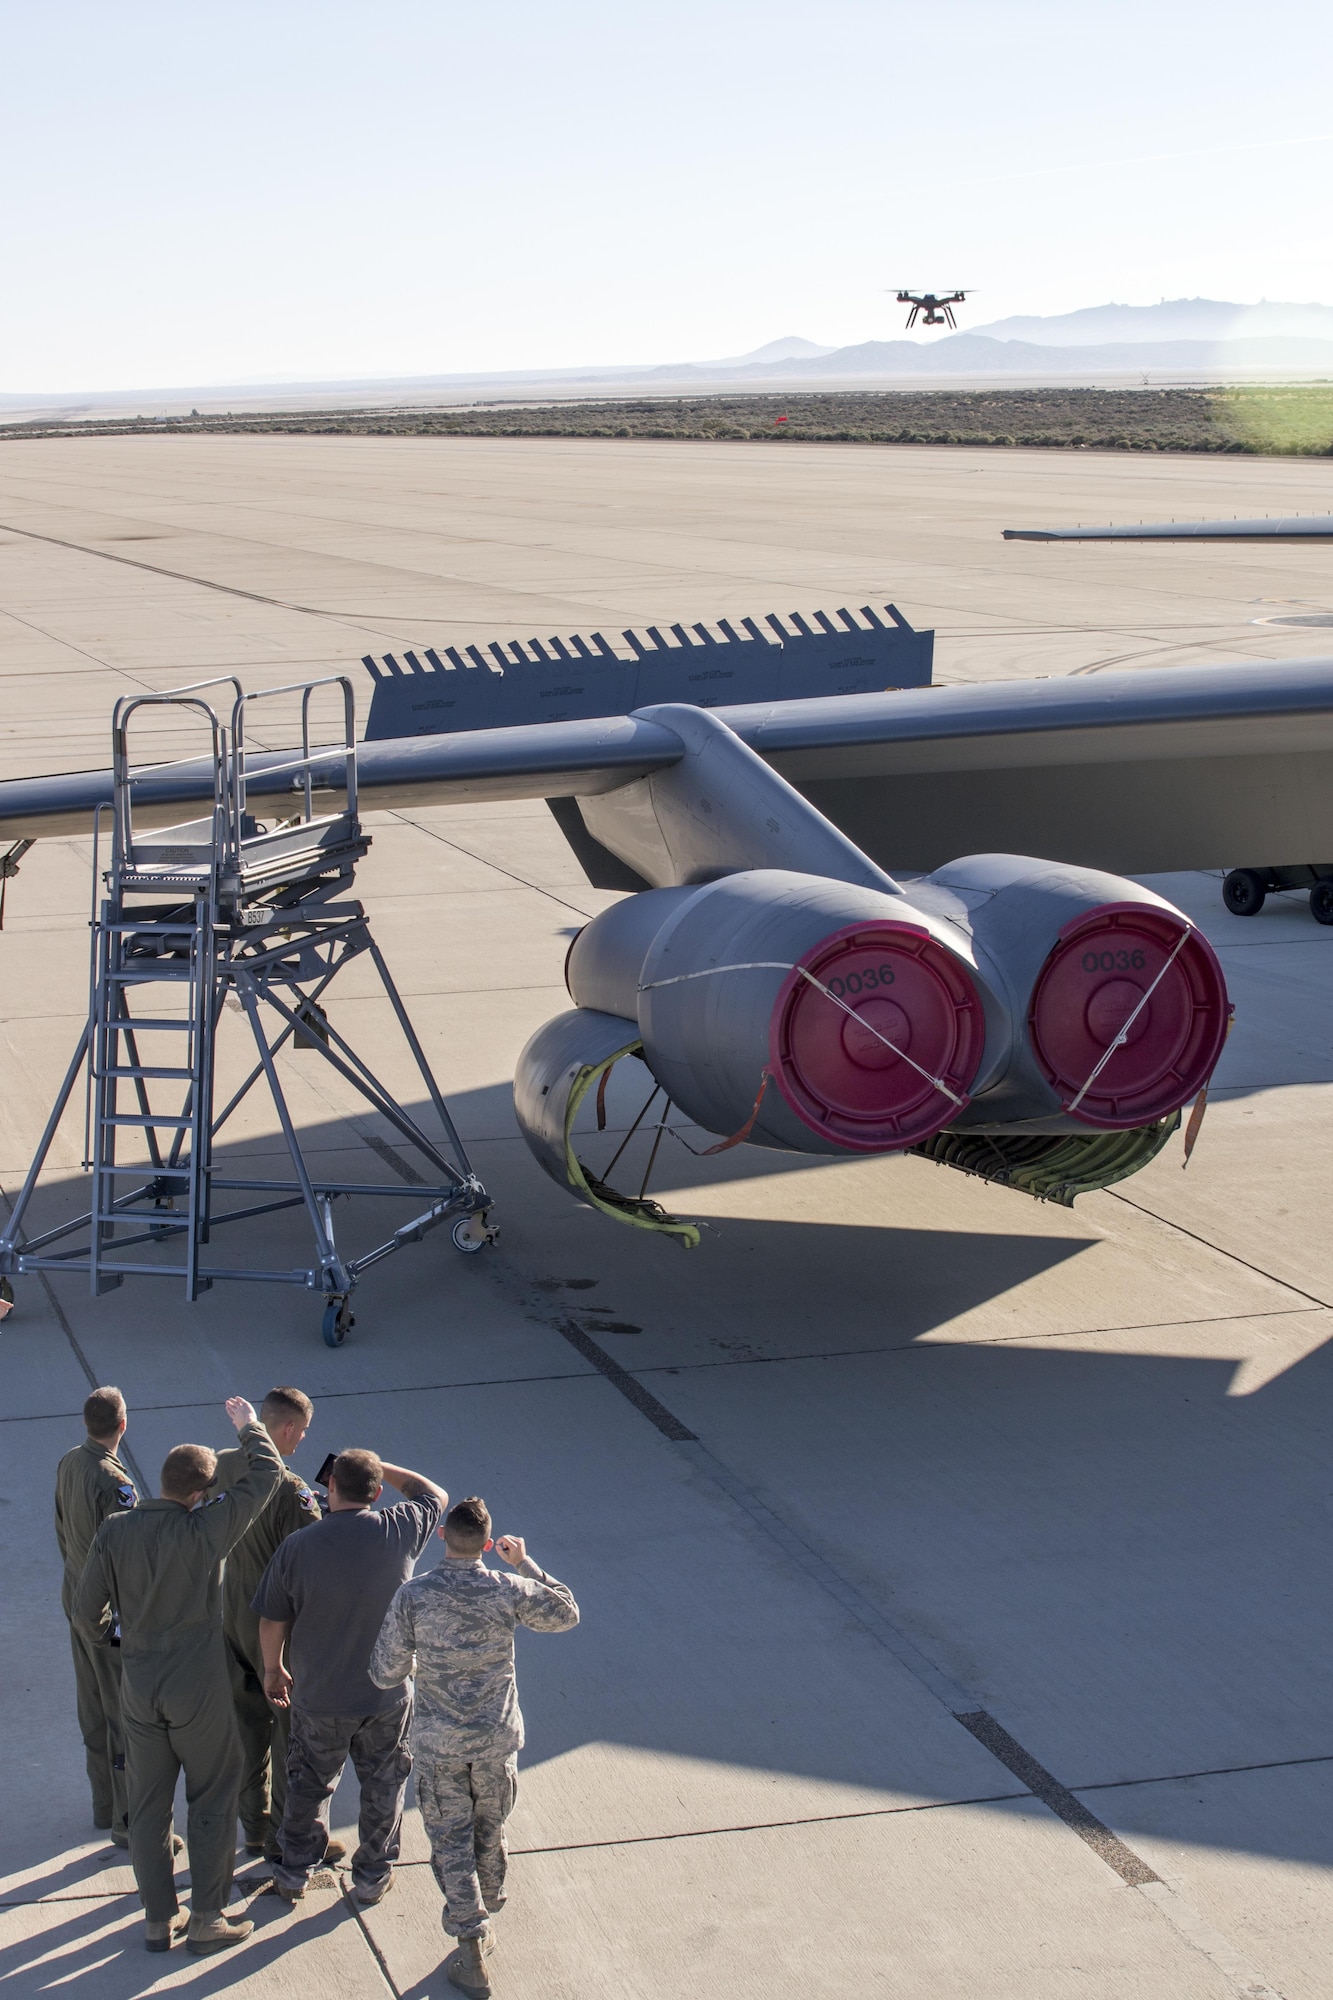 On March 16, the Emerging Technologies Combined Test Force used a small quadcopter equipped with a camera to perform a visual inspection of a B-52 Stratofortress. This was the first-ever test using a small unmanned aerial system near an active taxiway on an Air Force flightline.
(U.S. Air Force photo by Christian Turner)